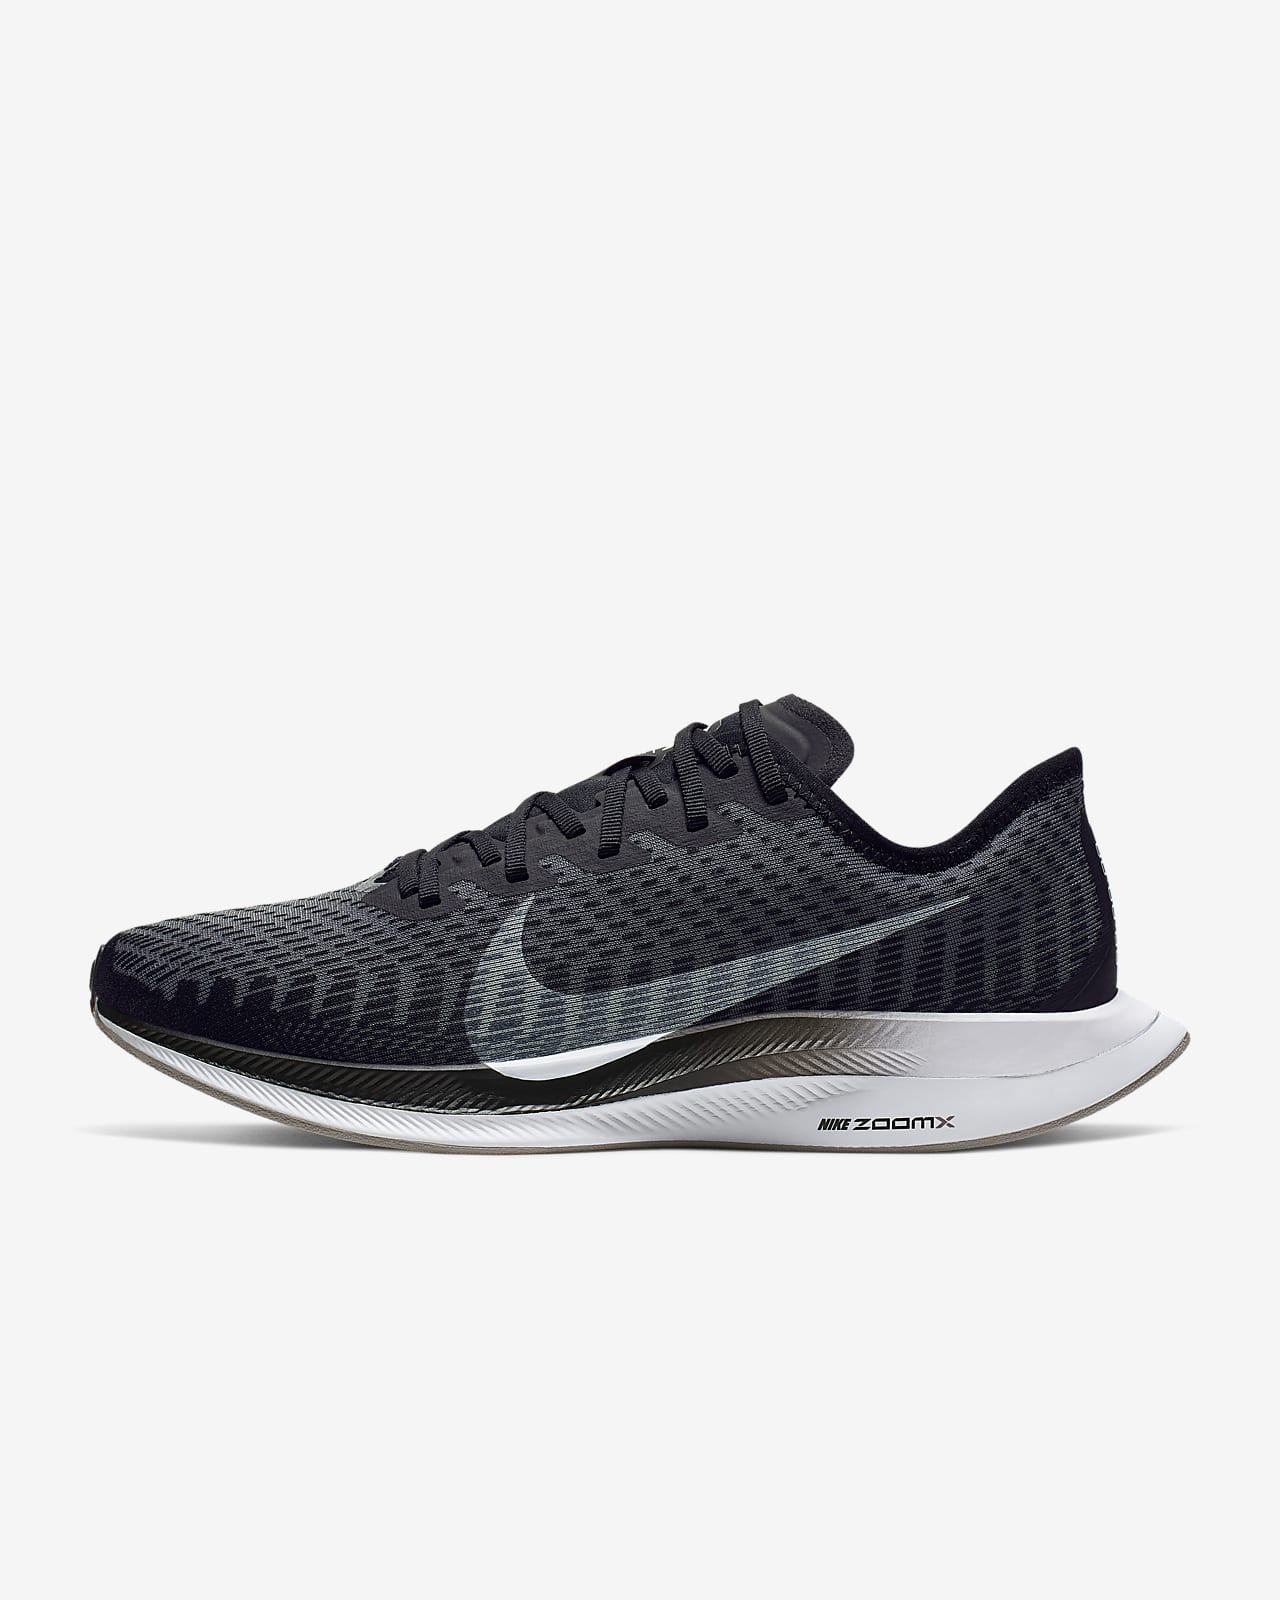 nike zoom running shoes for women